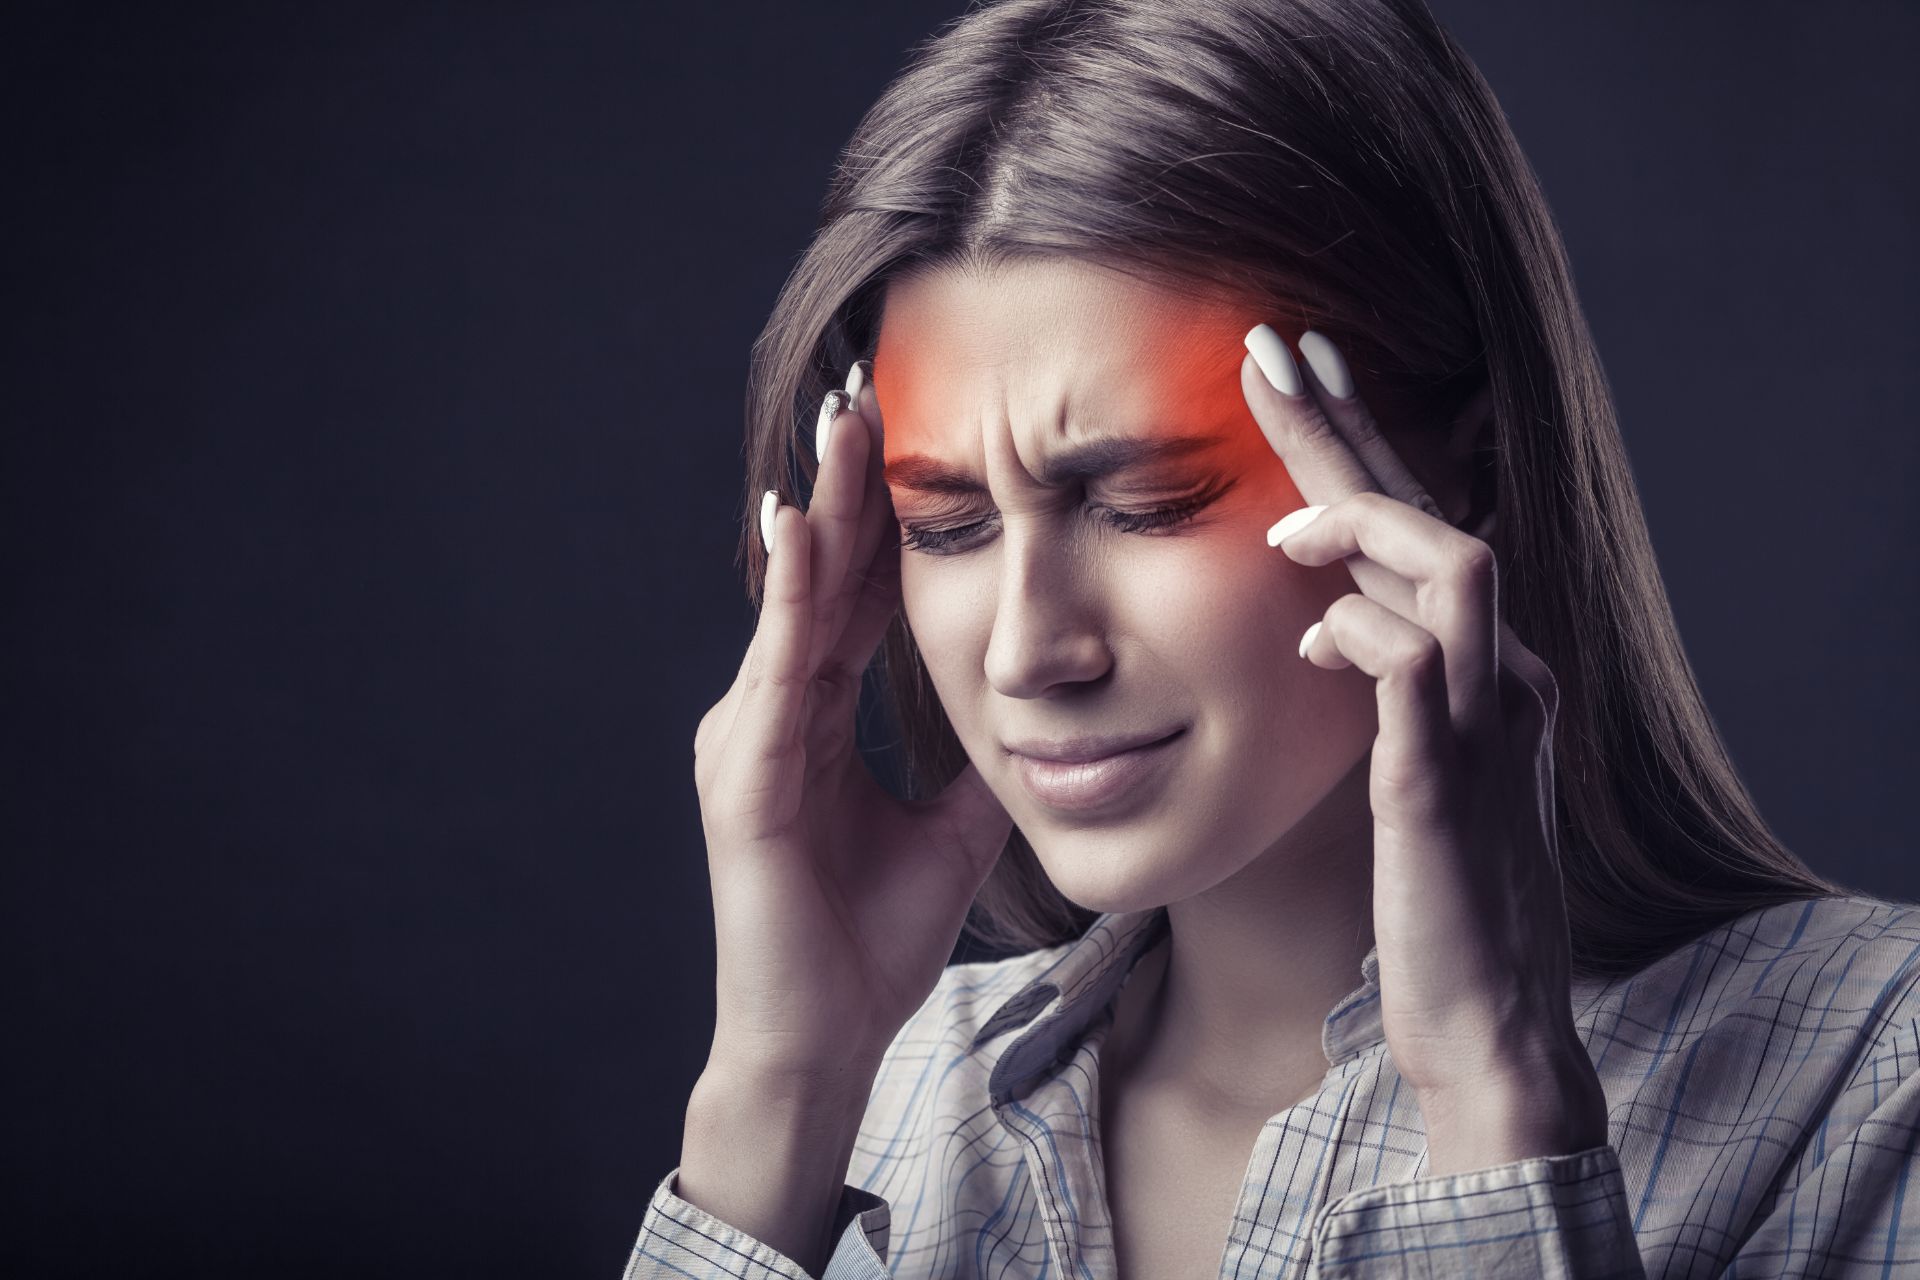 Is your Headache Telling You Something? When To Seek Medical Attention